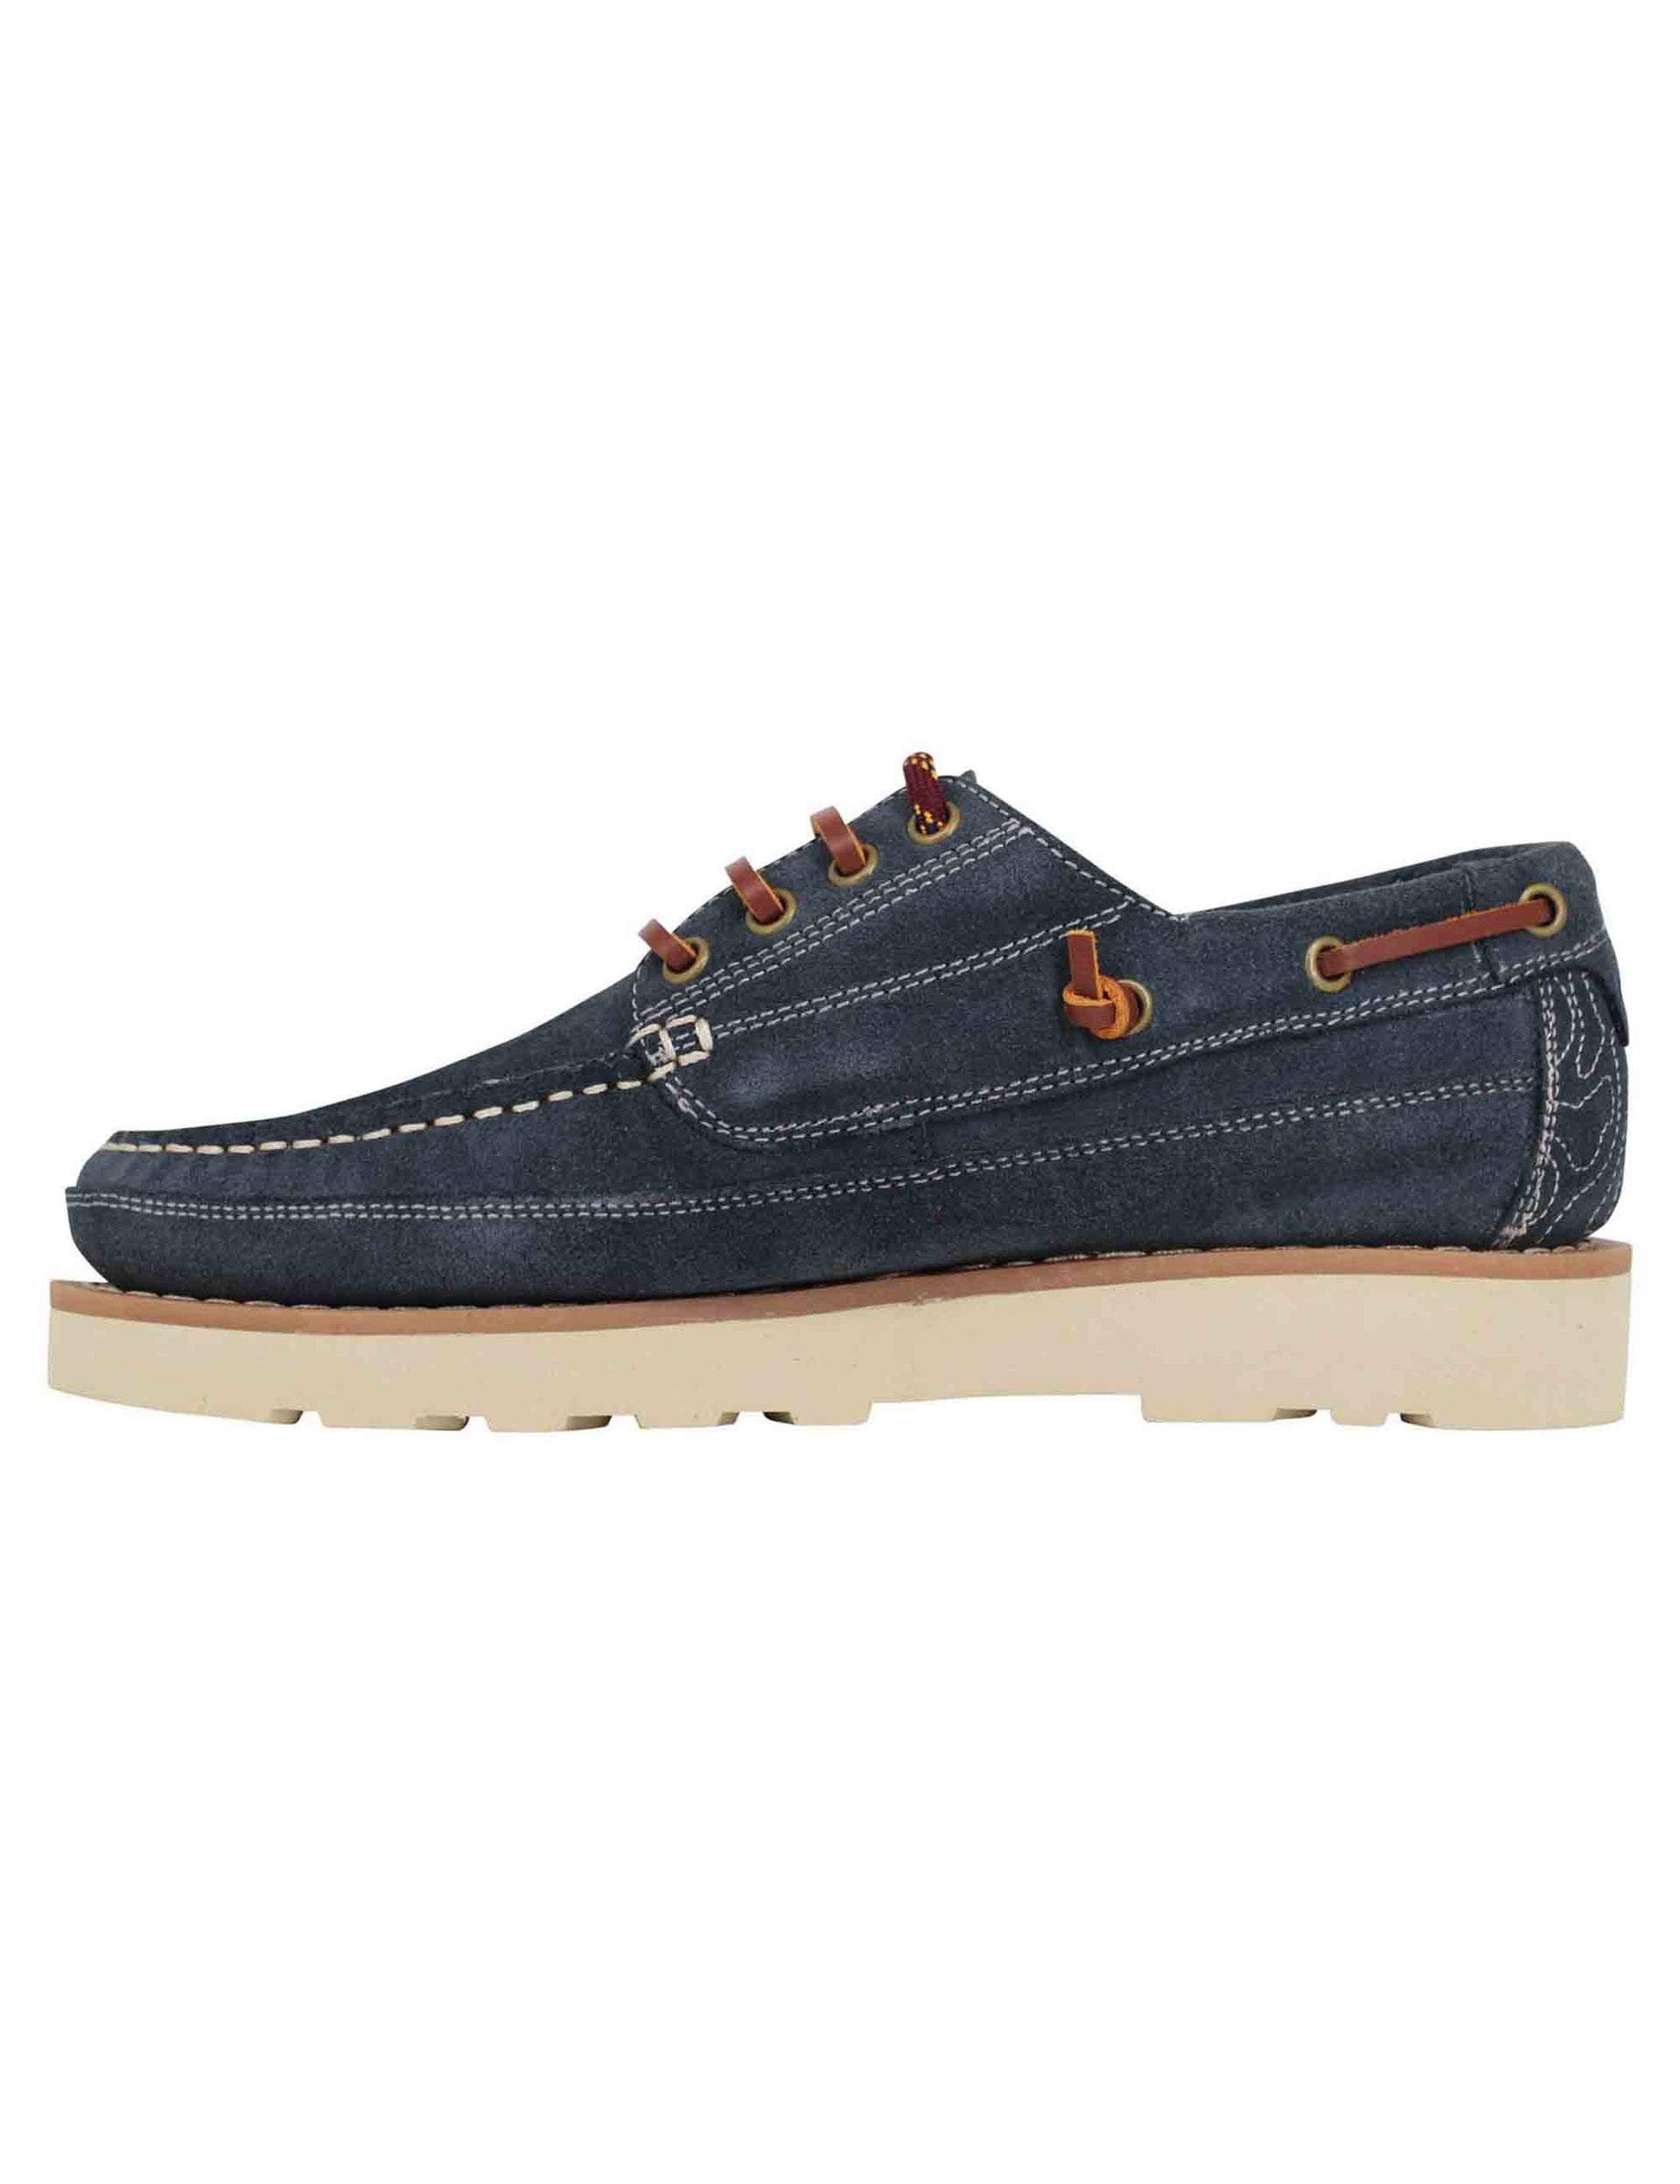 Hopi Suede men's lace-ups in blue suede with leather laces and white sole